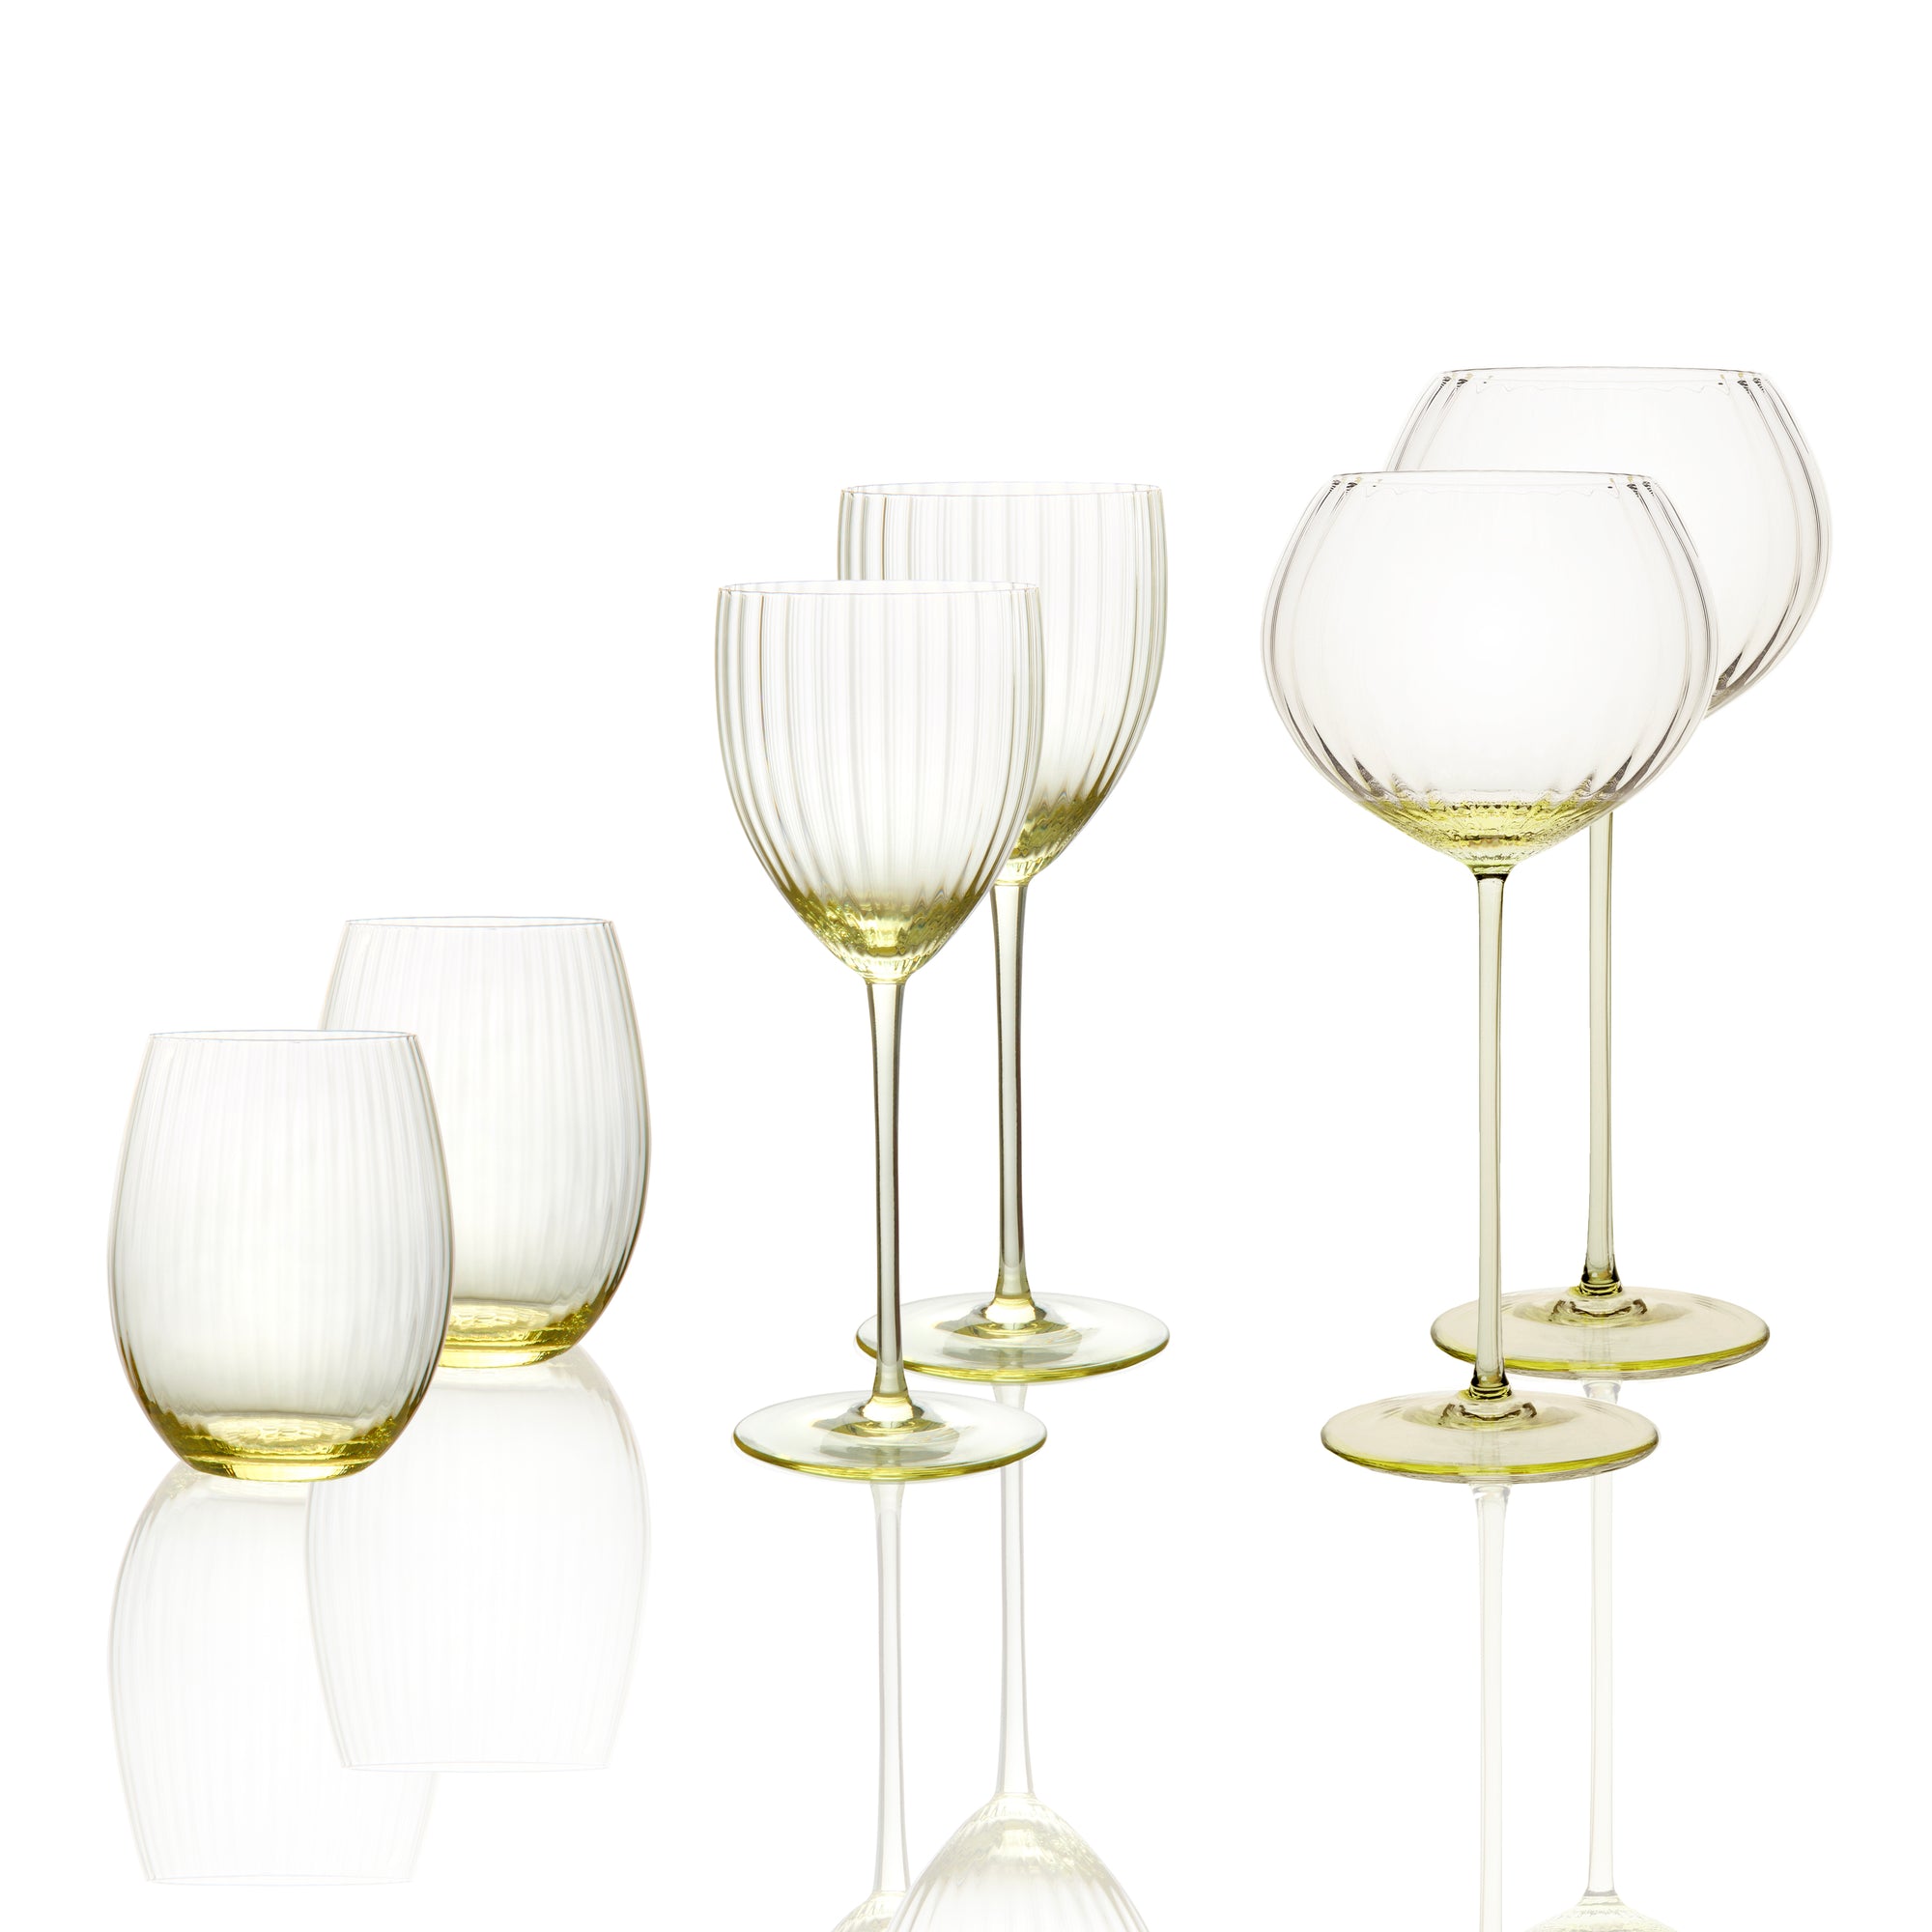 Quinn Starter Set- mouth-blown crystal wine collection includes 2 red wine balloon stems, 2 white wine stems, and 2 stemless glasses in delicate Citrine yellow from Caskata